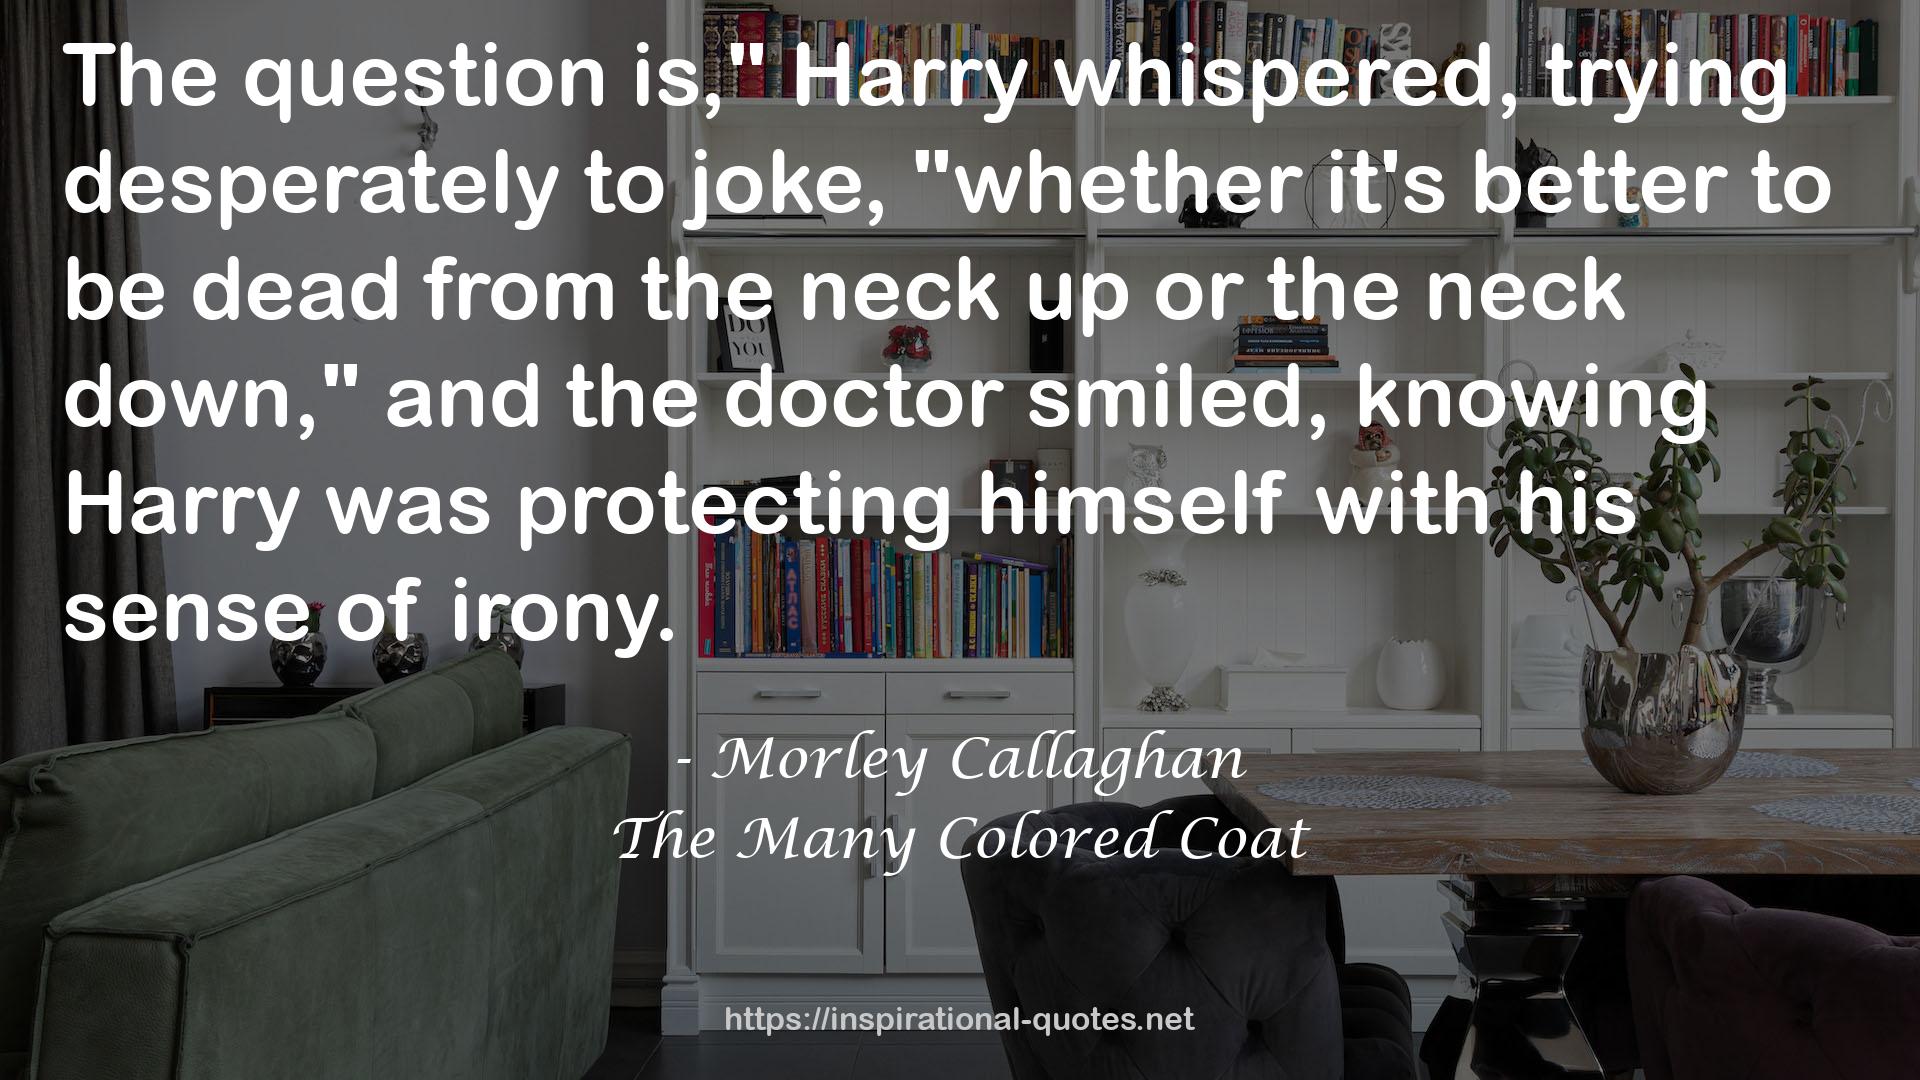 The Many Colored Coat QUOTES